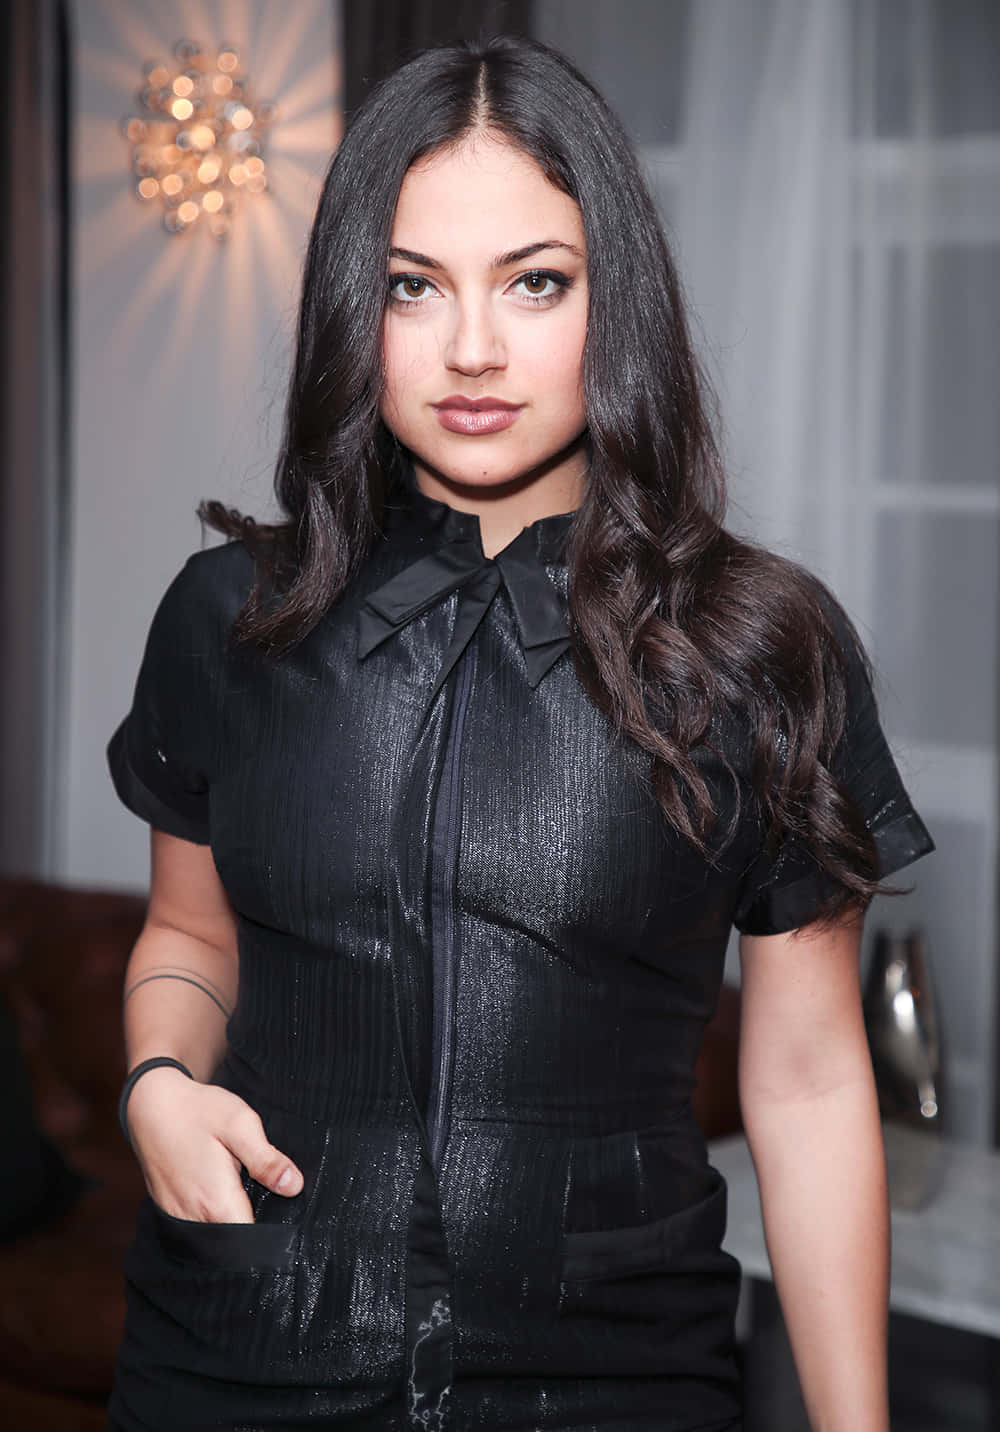 Inanna Sarkis Black Outfit Event Wallpaper